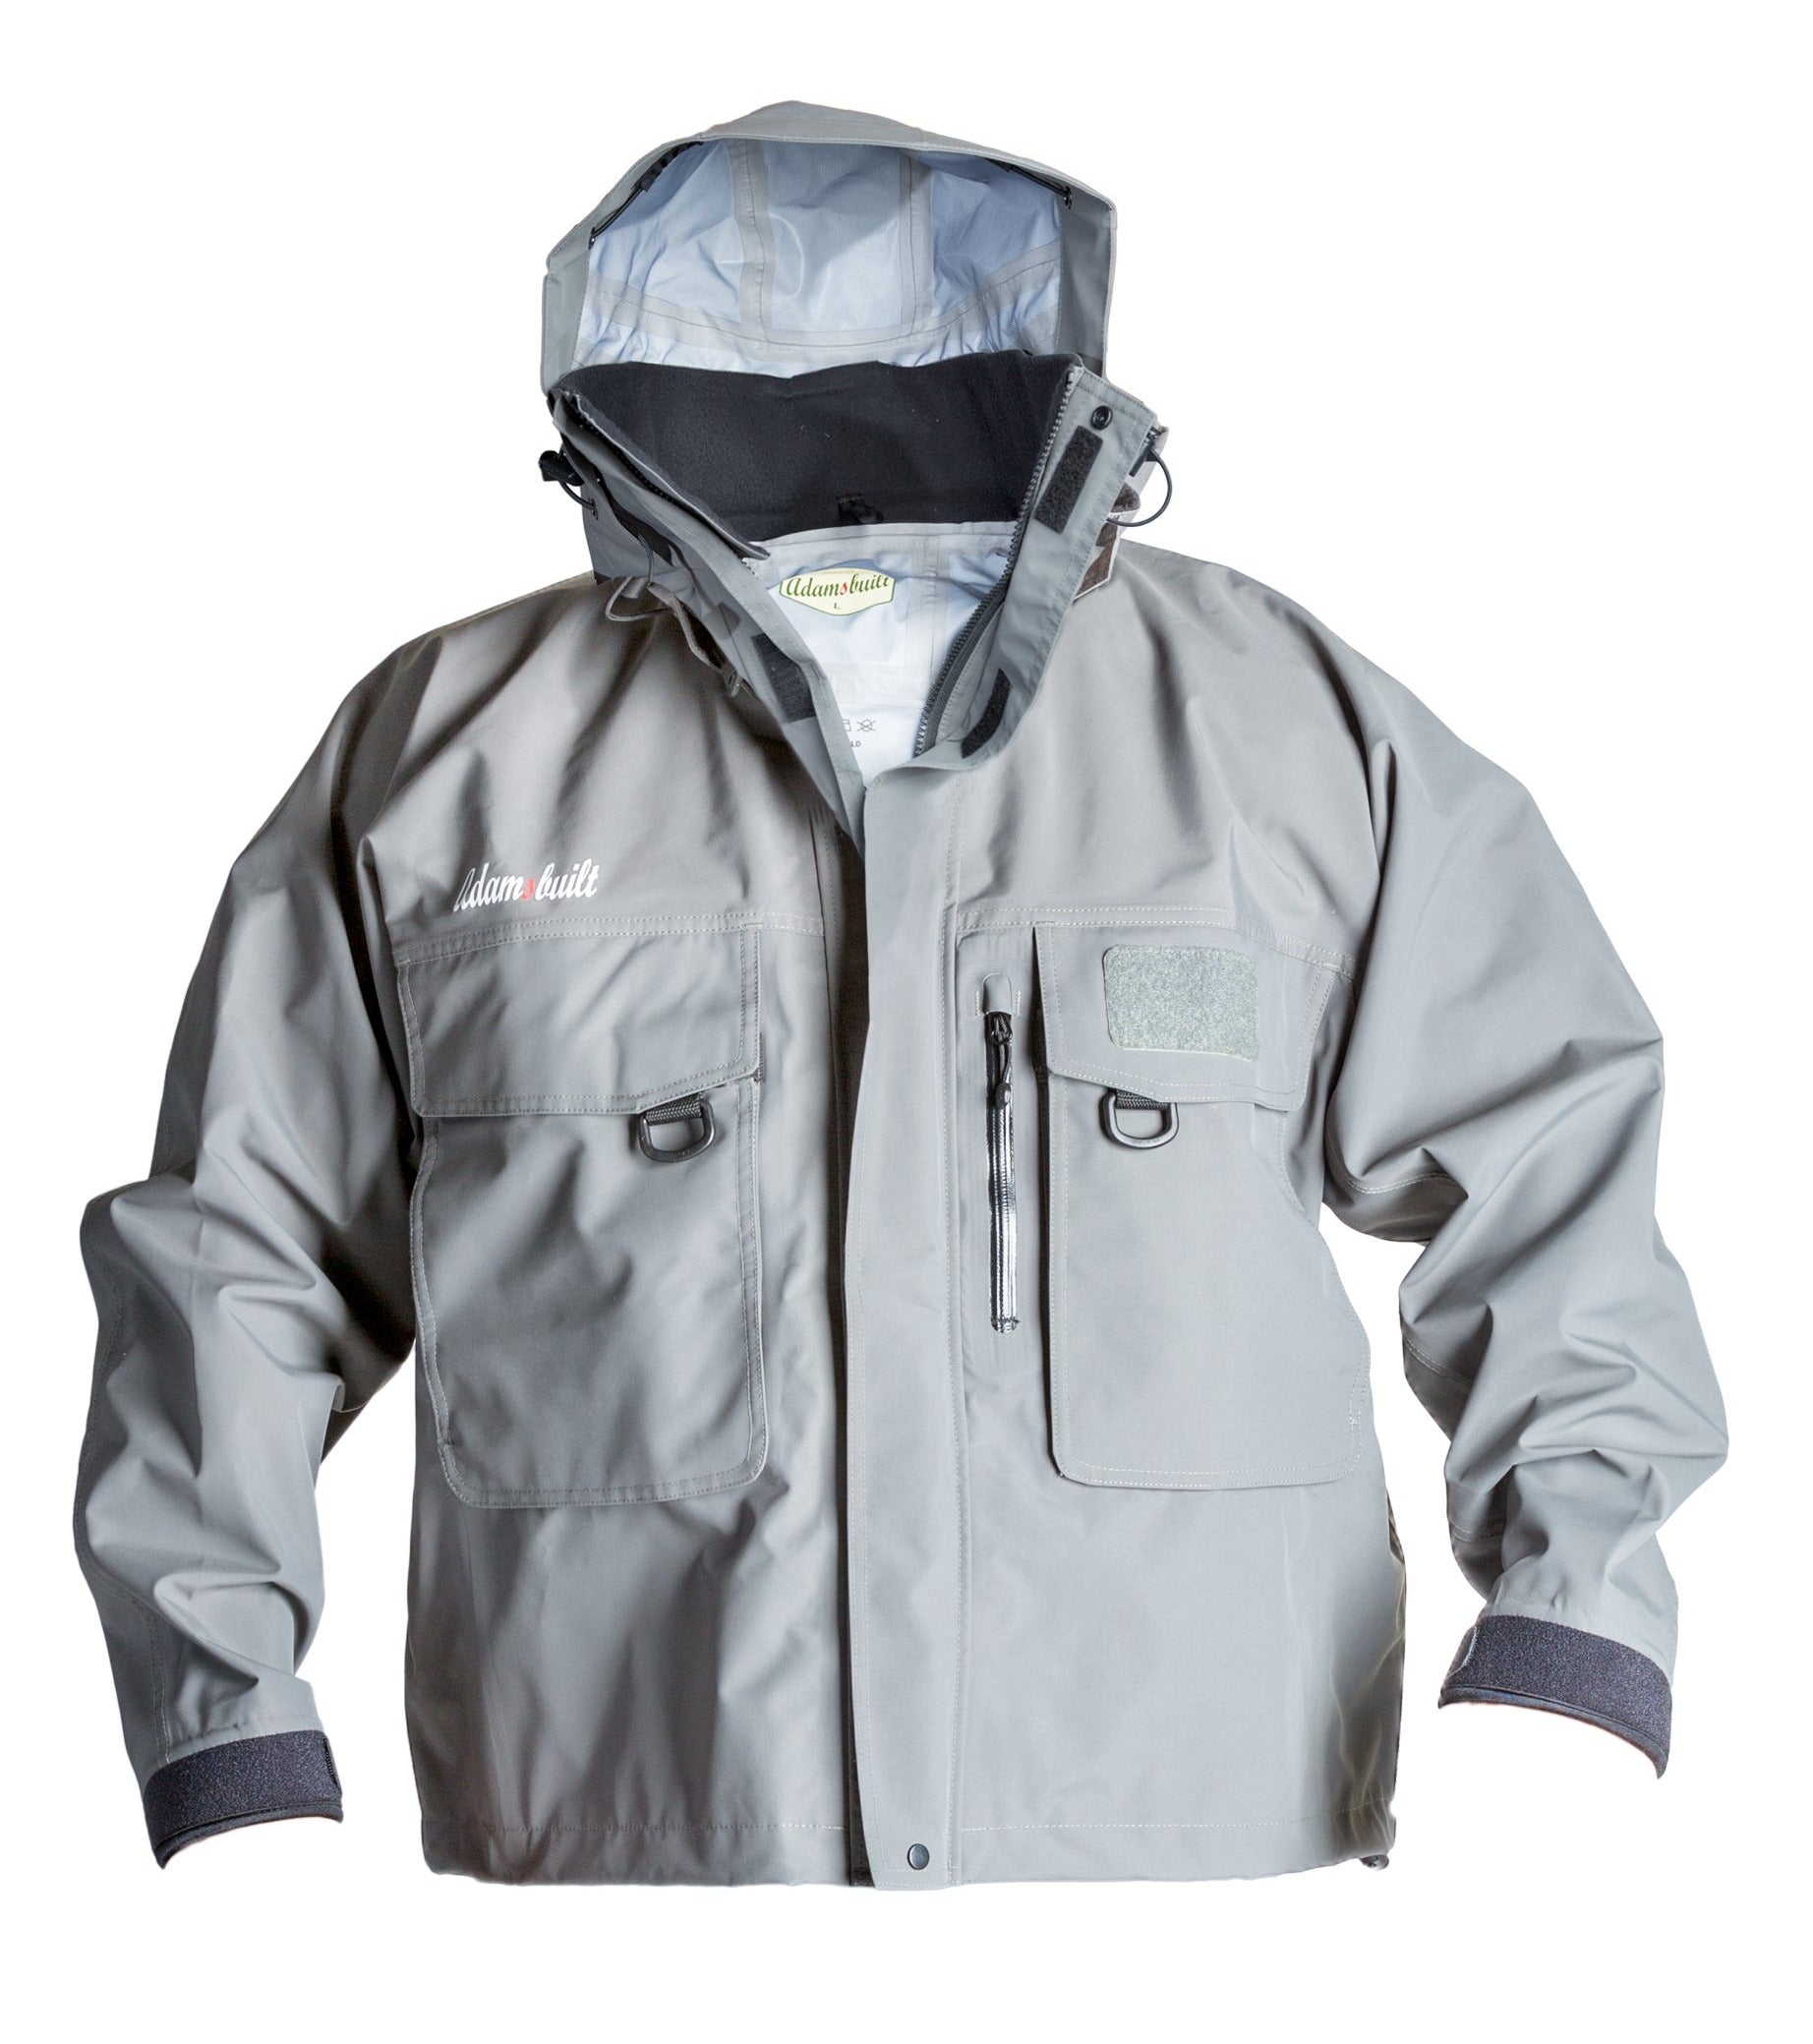 KENNETH FIELD Wading Fishing Jacket - その他